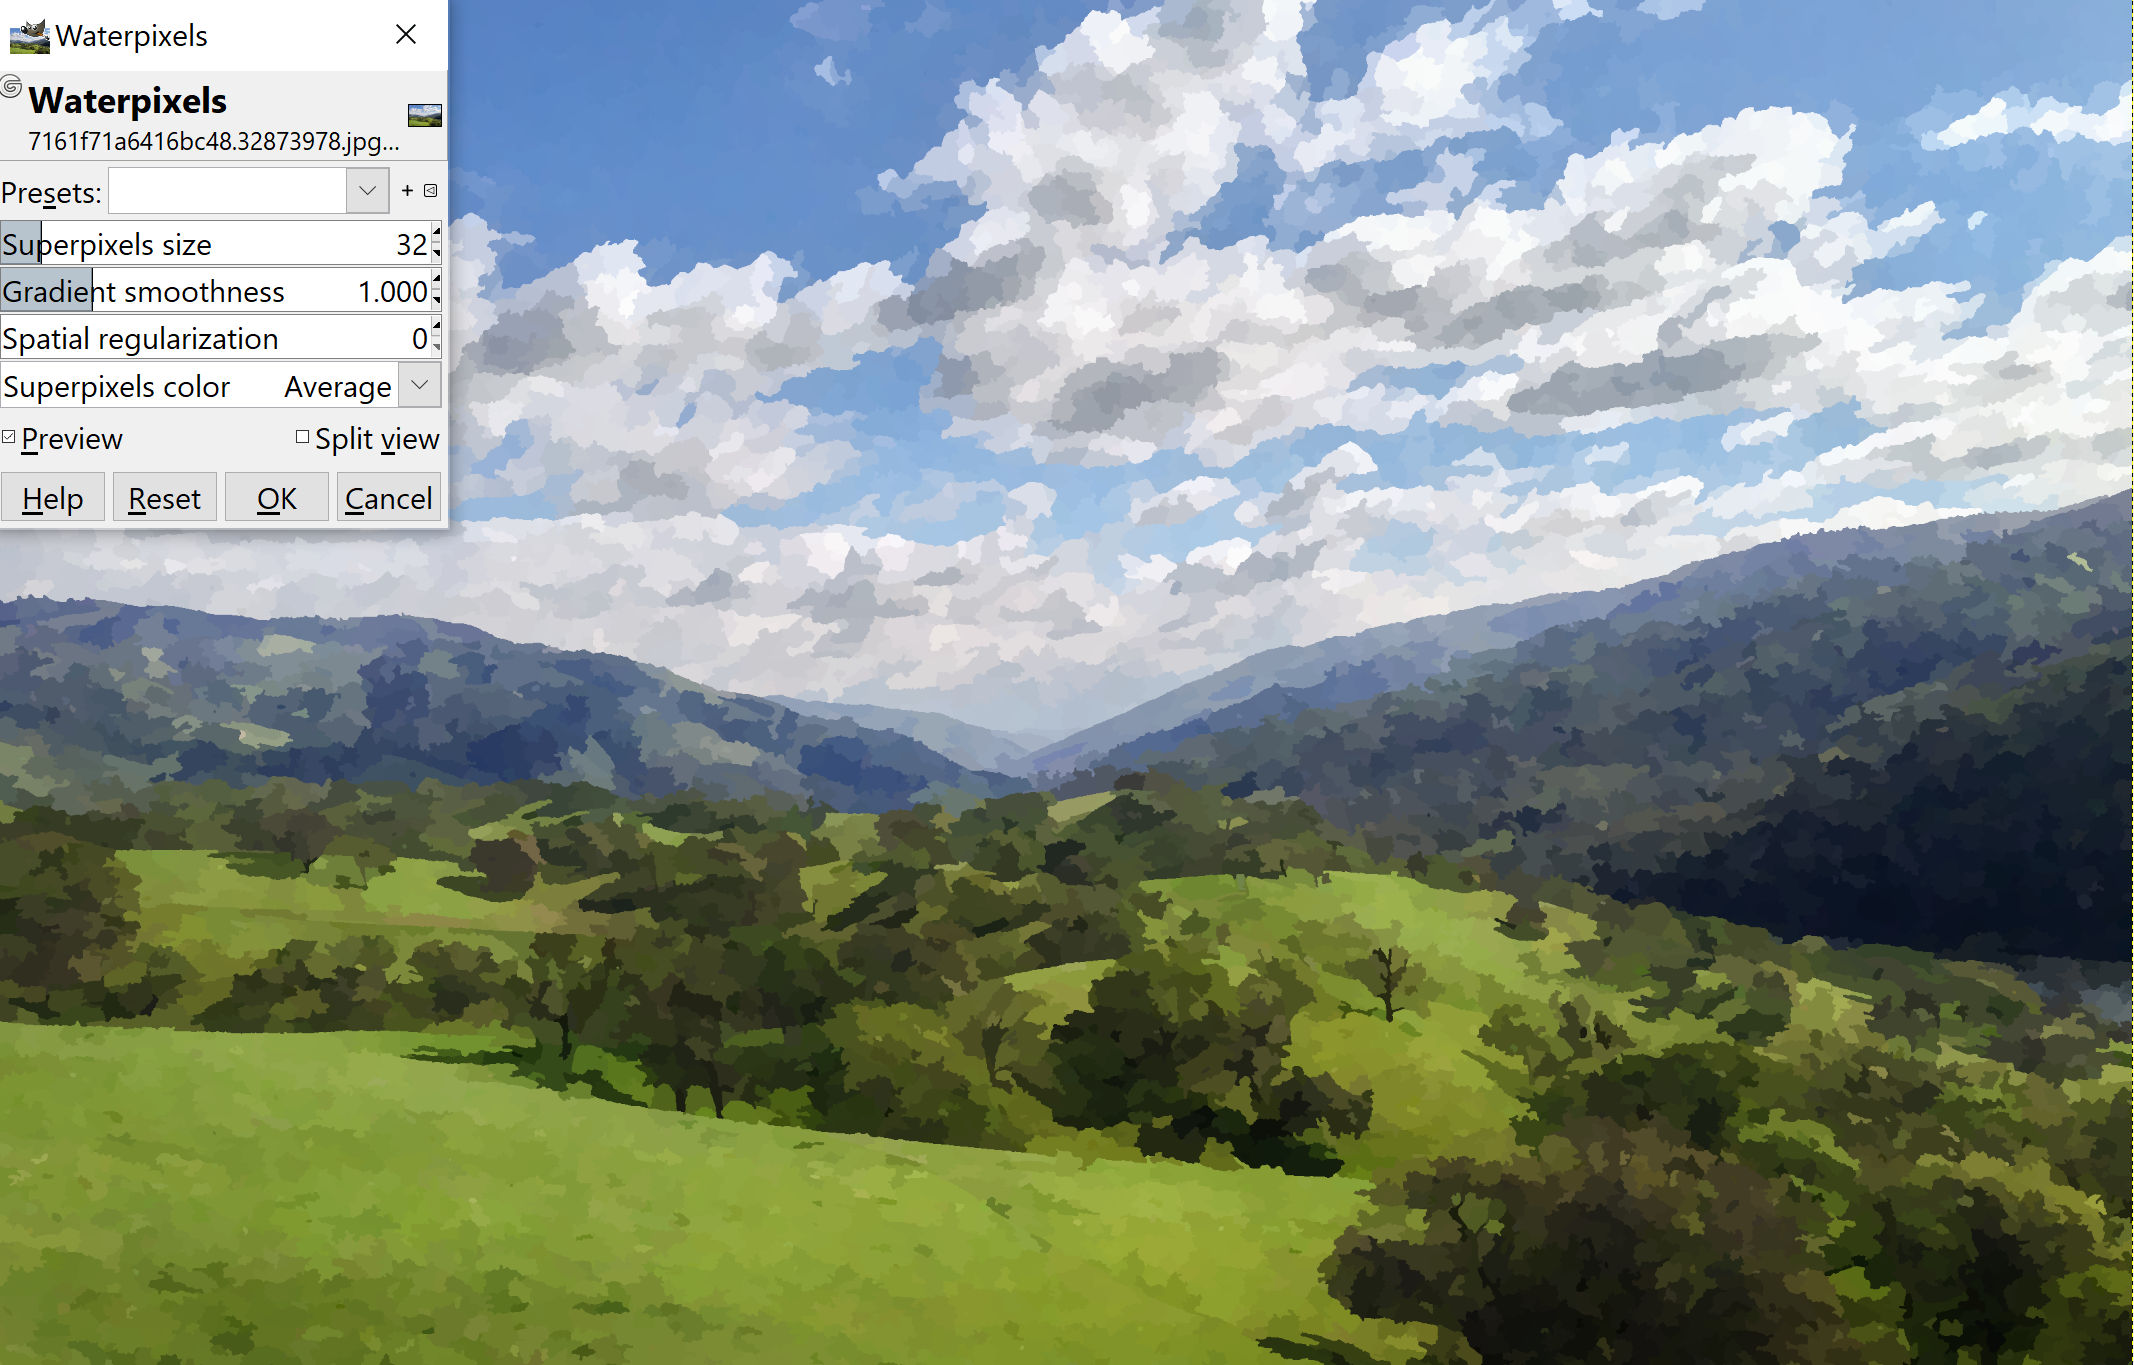 GIMP photo editing software canvas area with hills in front of a mountainside in the image.  In the upper left corner is a control box to control a "aquatic pixels" artistic filter.